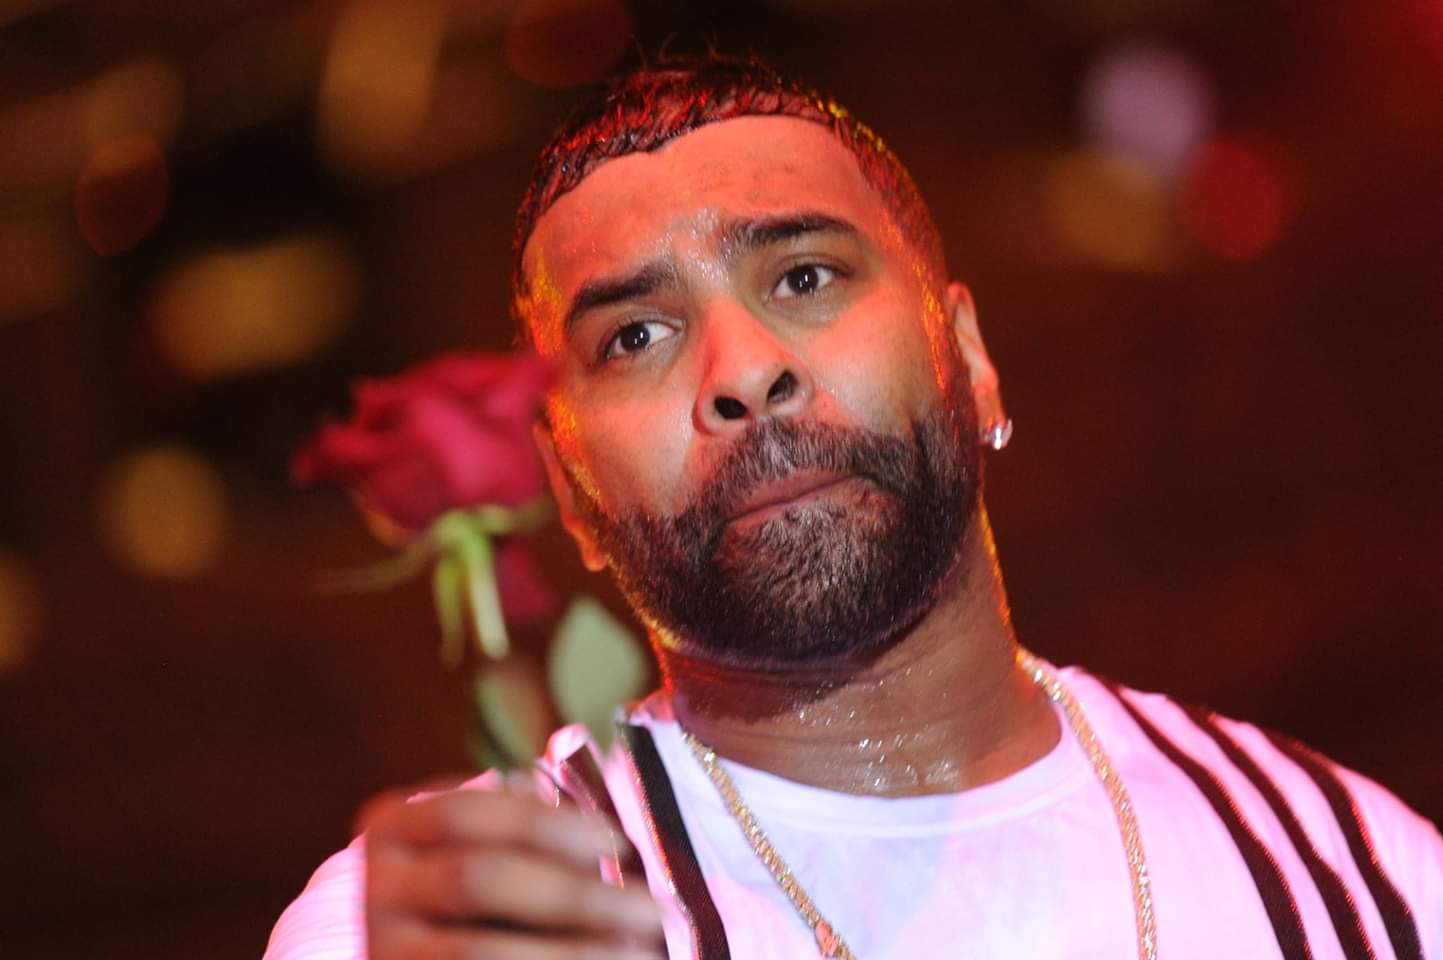 ” I actually Din’t See What They Did,” Ginuwine Comments on incident